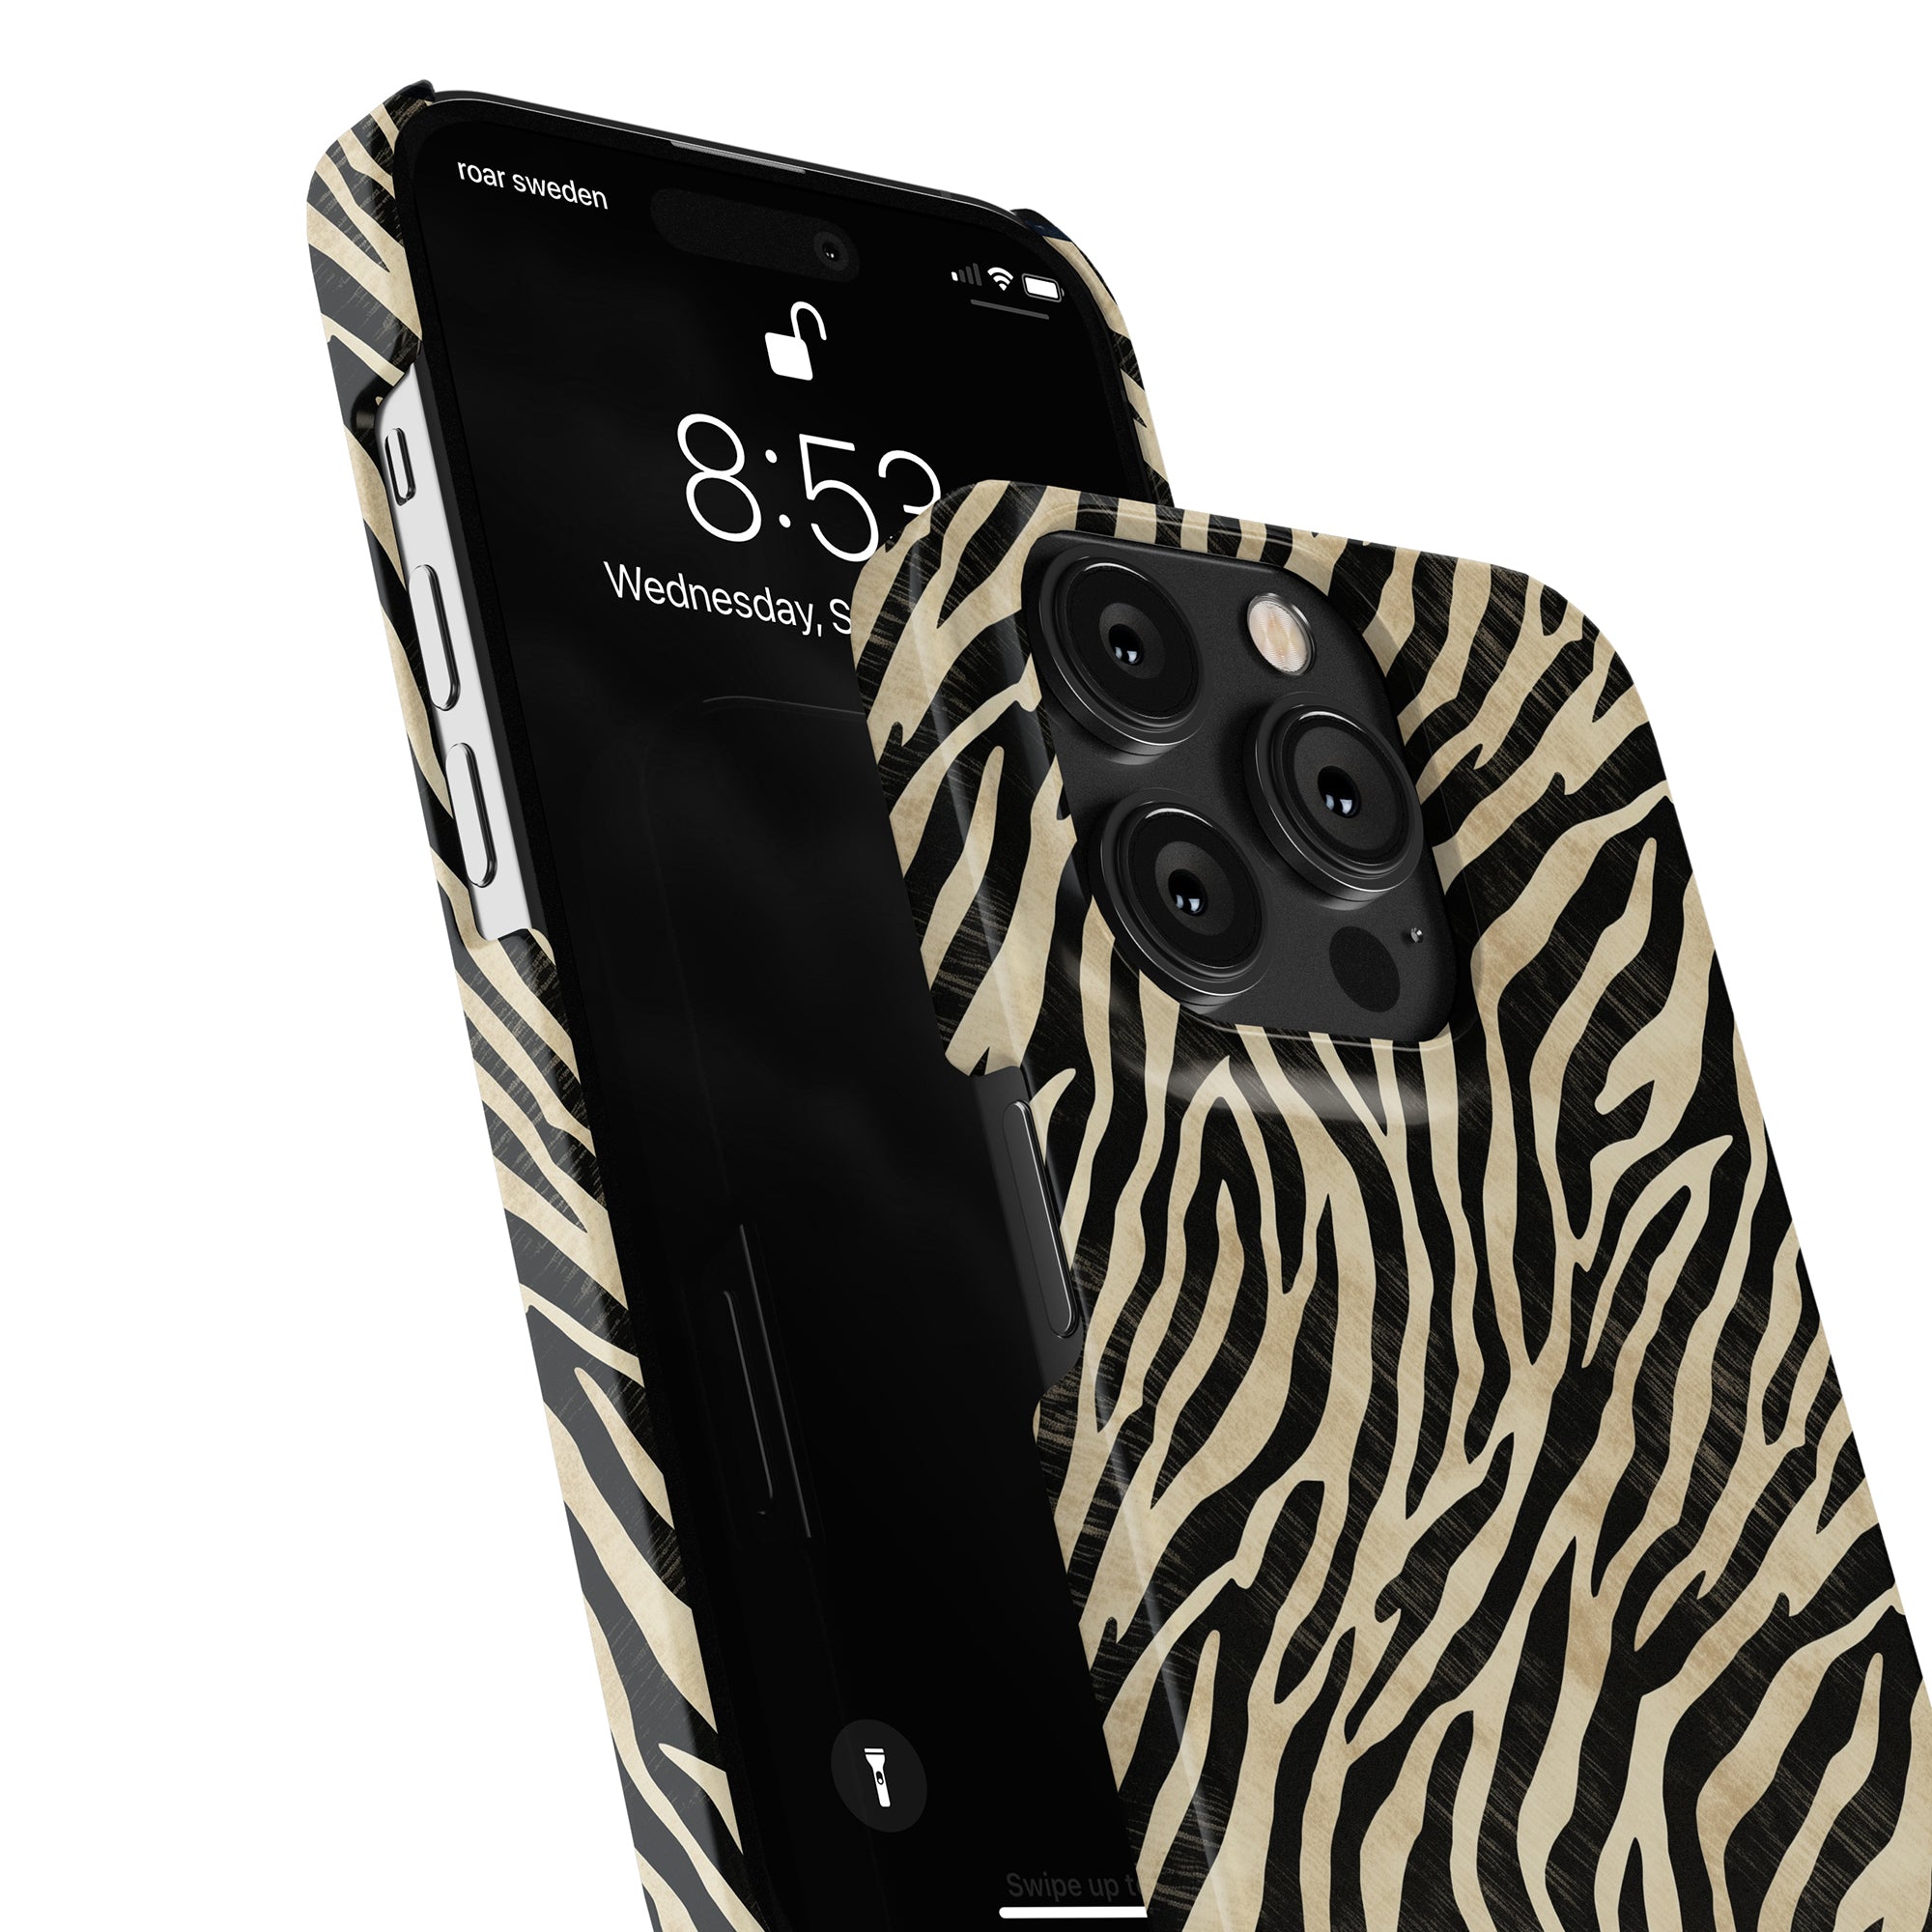 A smartphone with a Marty - Slim case from the Zebra Collection displays the time as 8:53 and shows a partial lock screen. The phone is positioned at an angle with the camera lenses visible.